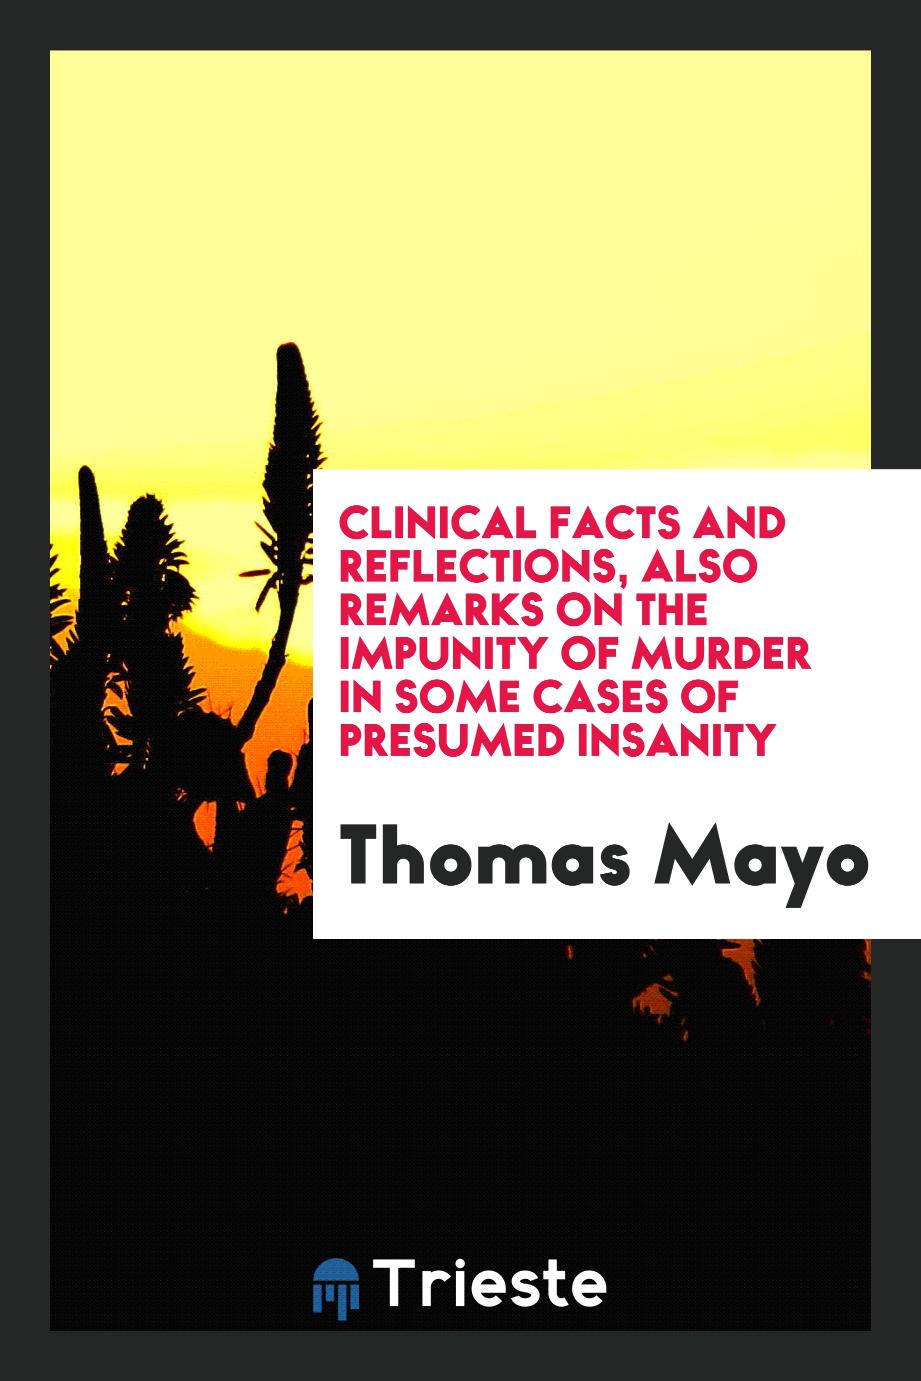 Clinical Facts and Reflections, Also Remarks on the Impunity of Murder in Some Cases of Presumed Insanity